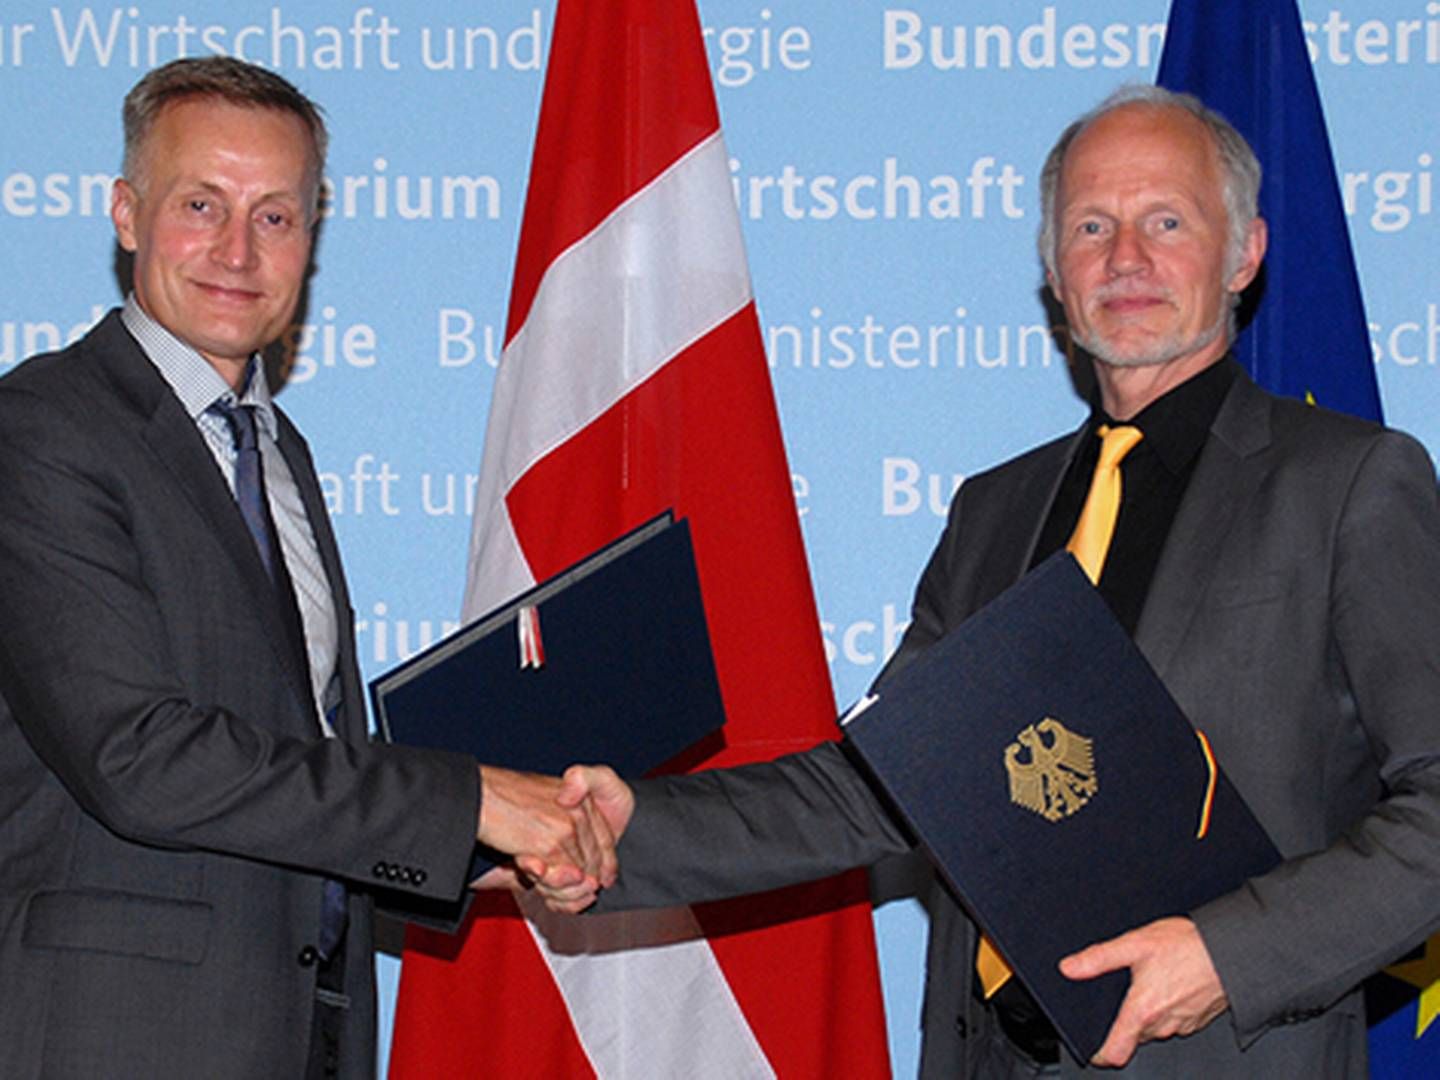 Last year, Denmark and Germany – represented by William Boe of the Danish embassy in Berlin and the German state secretary Rainer Baake – entered into a transnational pilot tender for solar power. Now, Germany would formally like to allow wind developers form other countries to bid in German tenders as well.